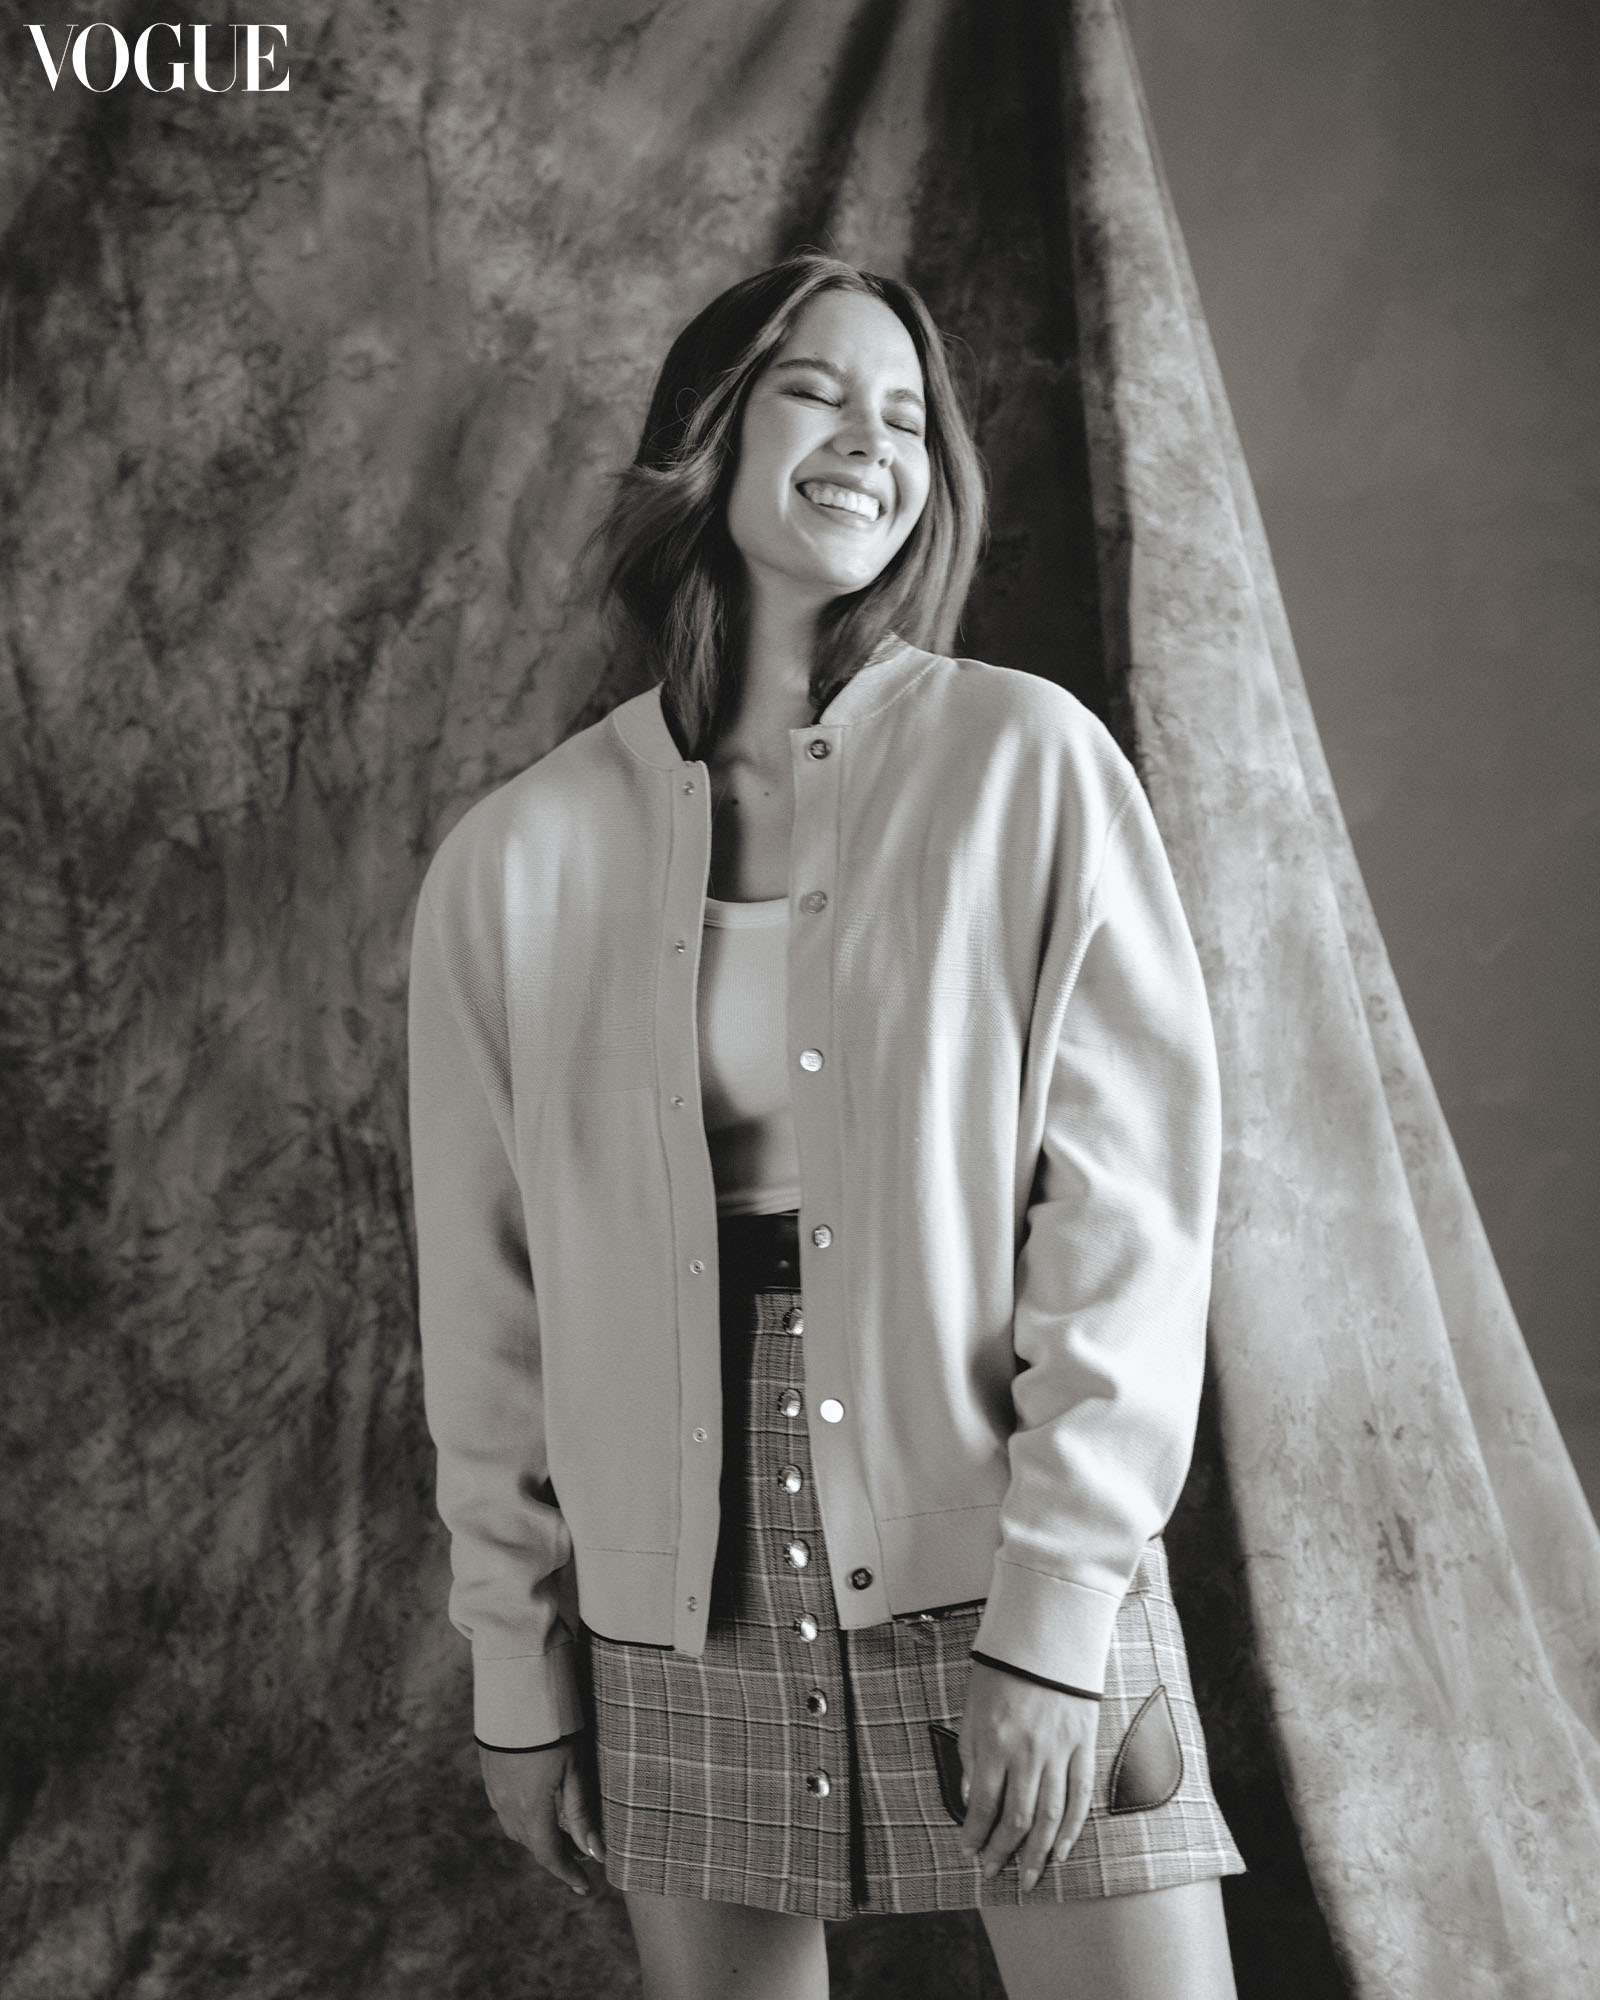 a black and white portrait of Catriona Gray smiling wearing a jacket and plaid skirt